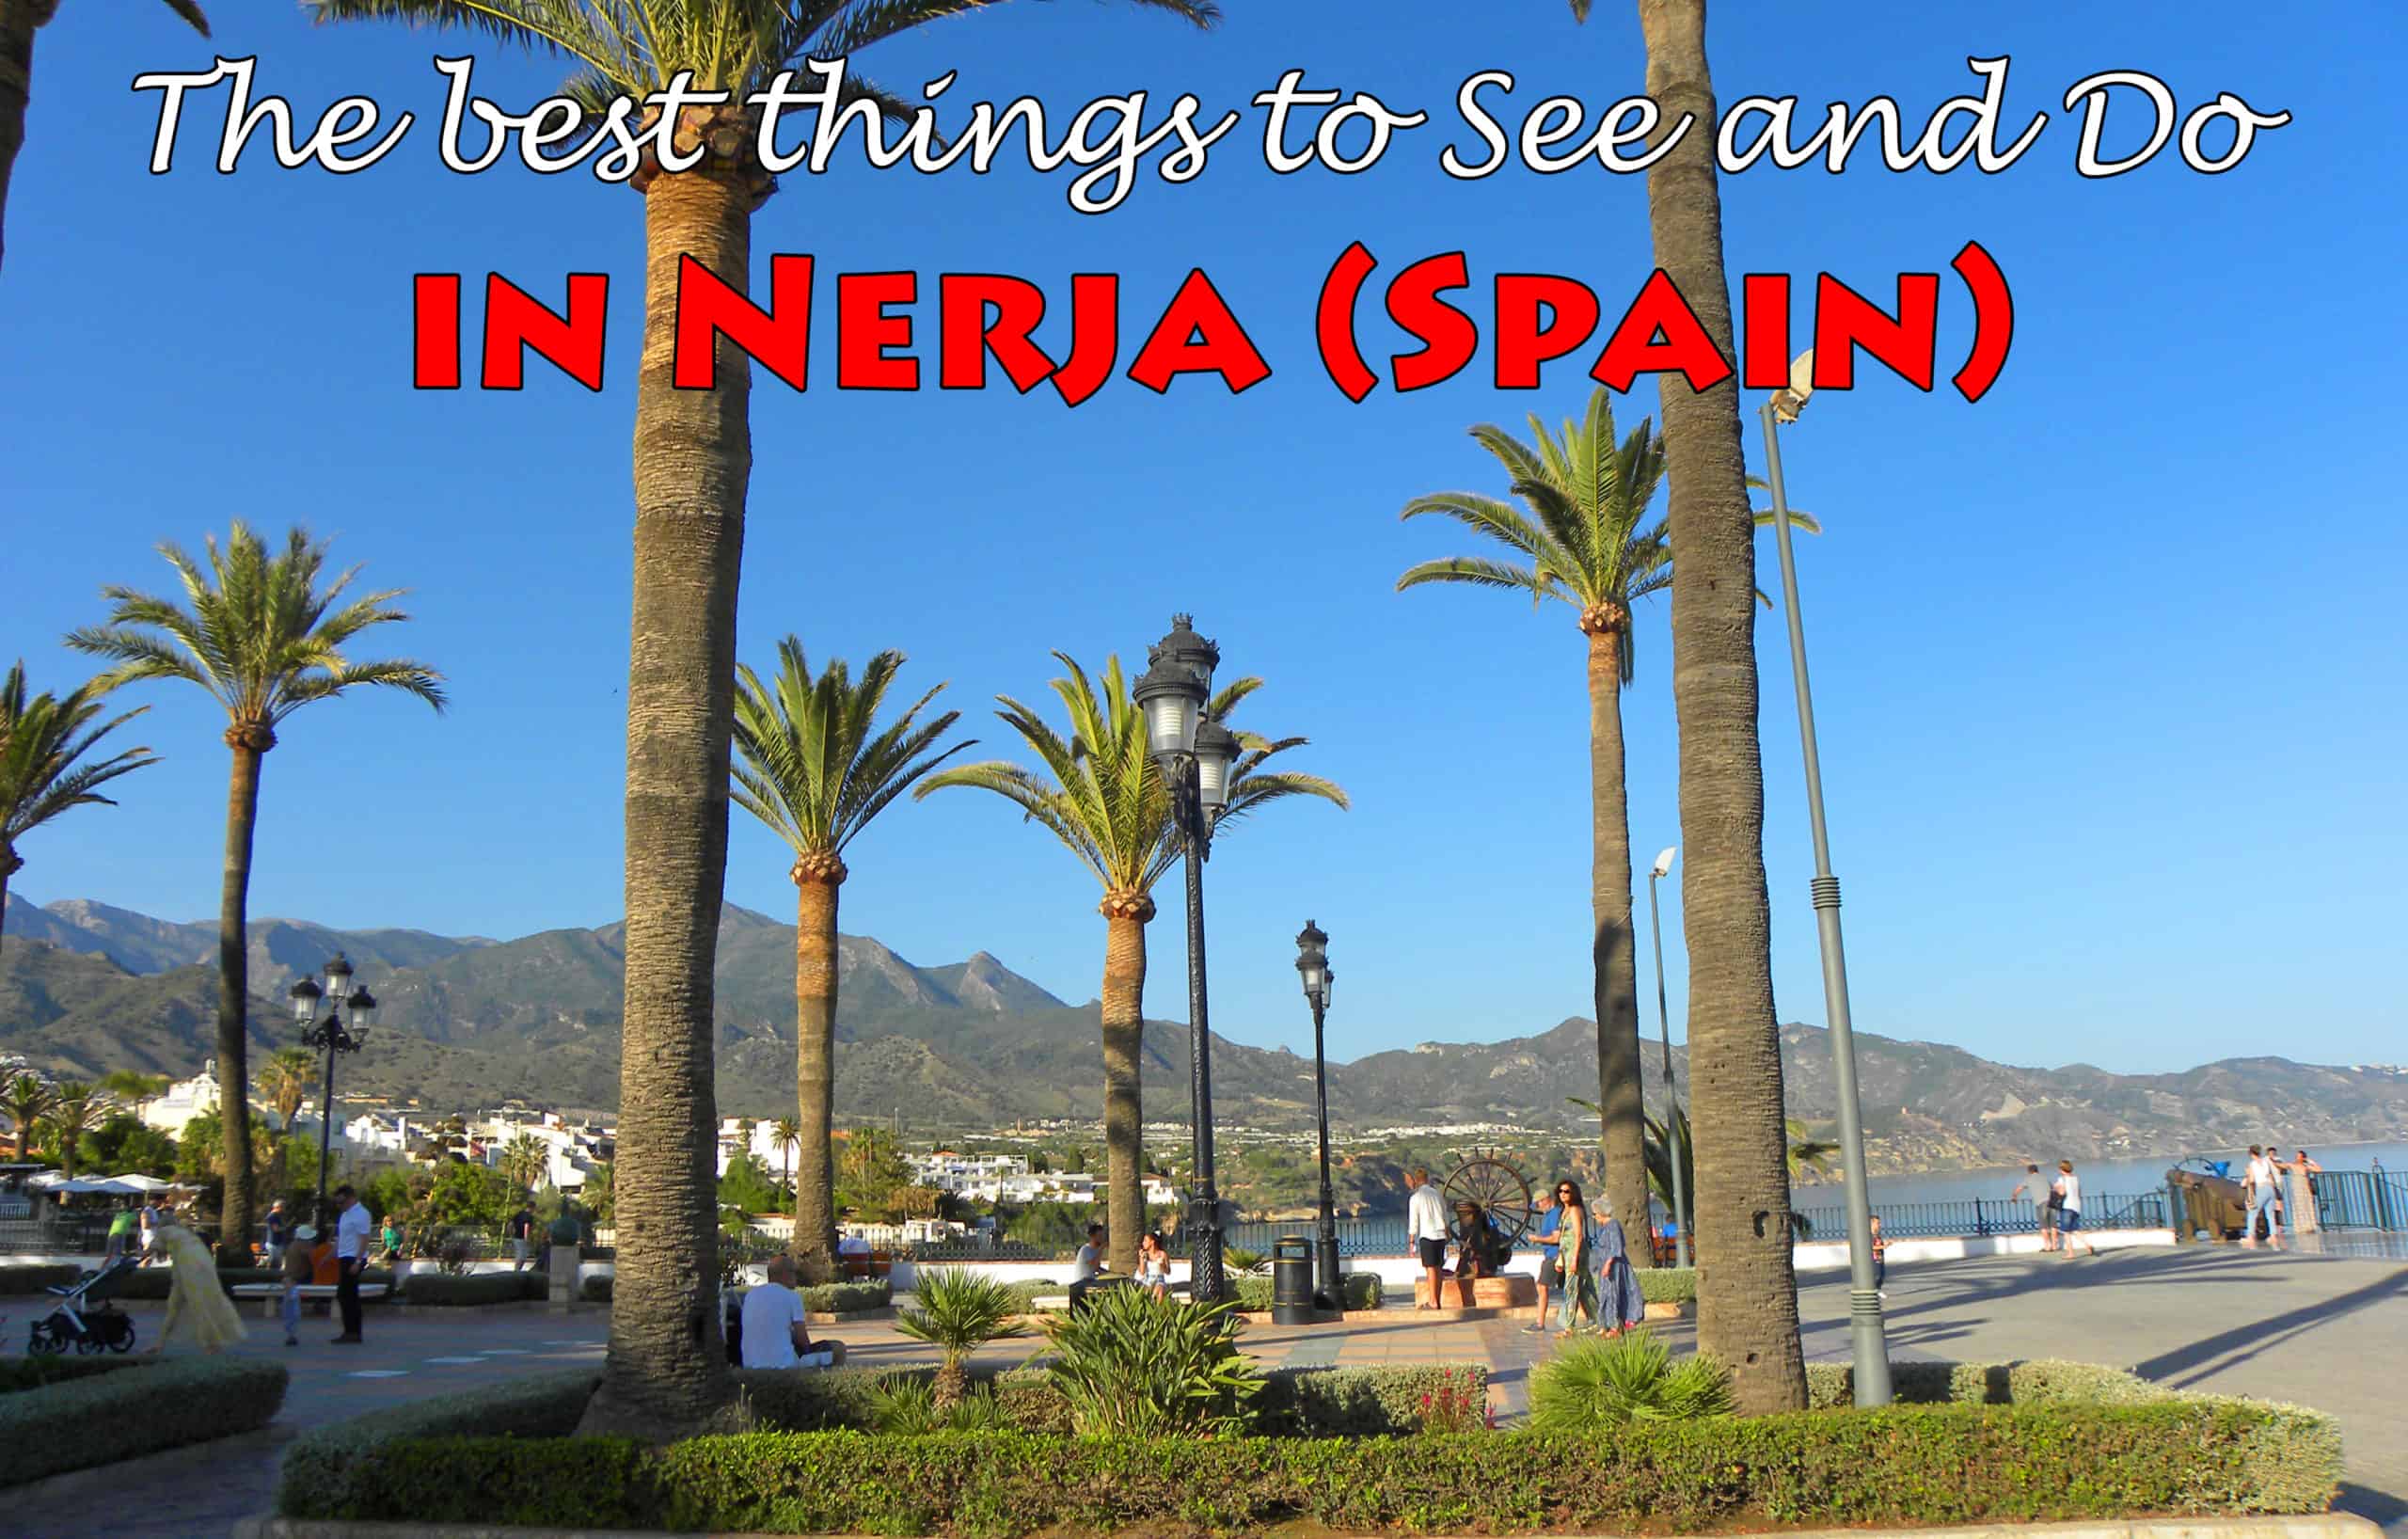 The best things to See and Do in Nerja